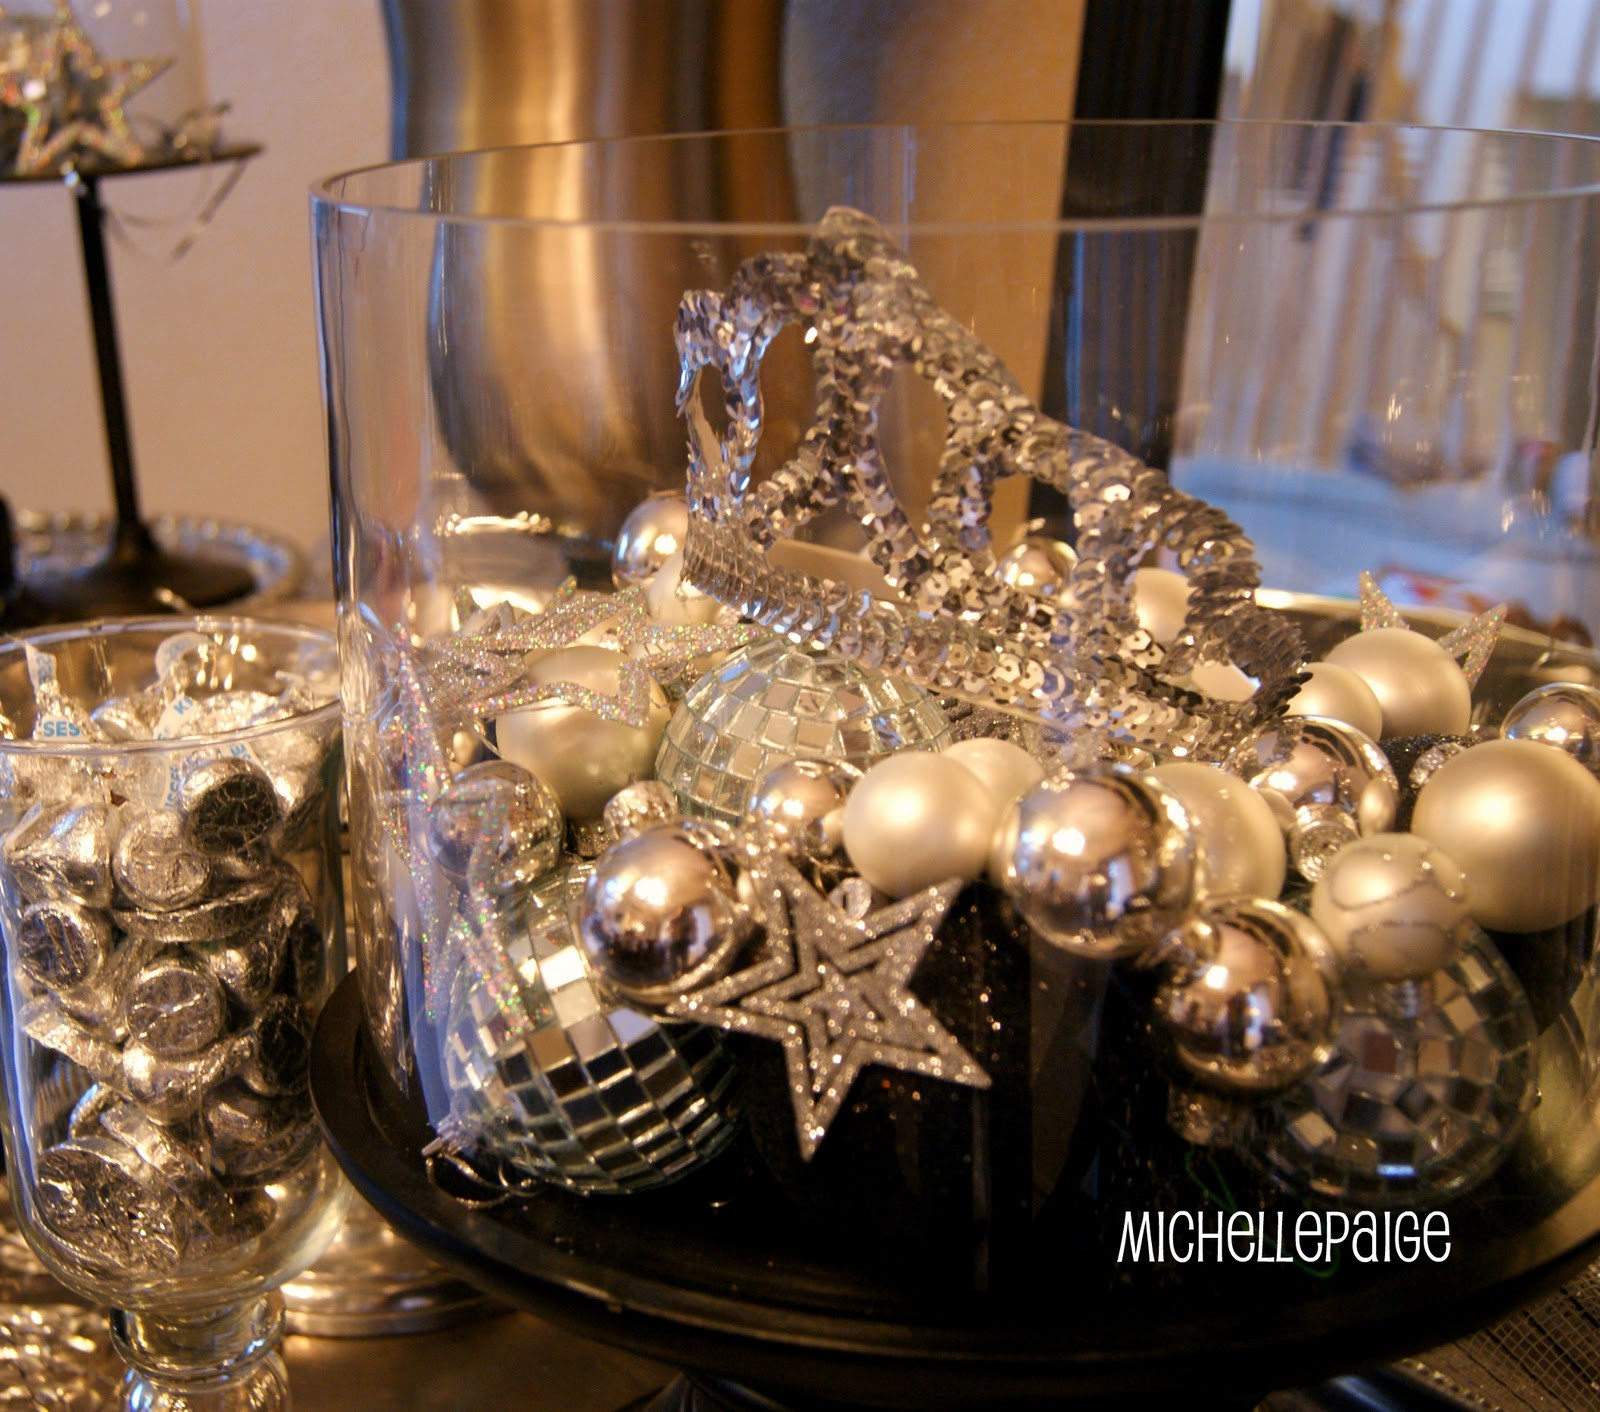 New Year Decor Ideas
 michelle paige blogs New Year s Eve Decor